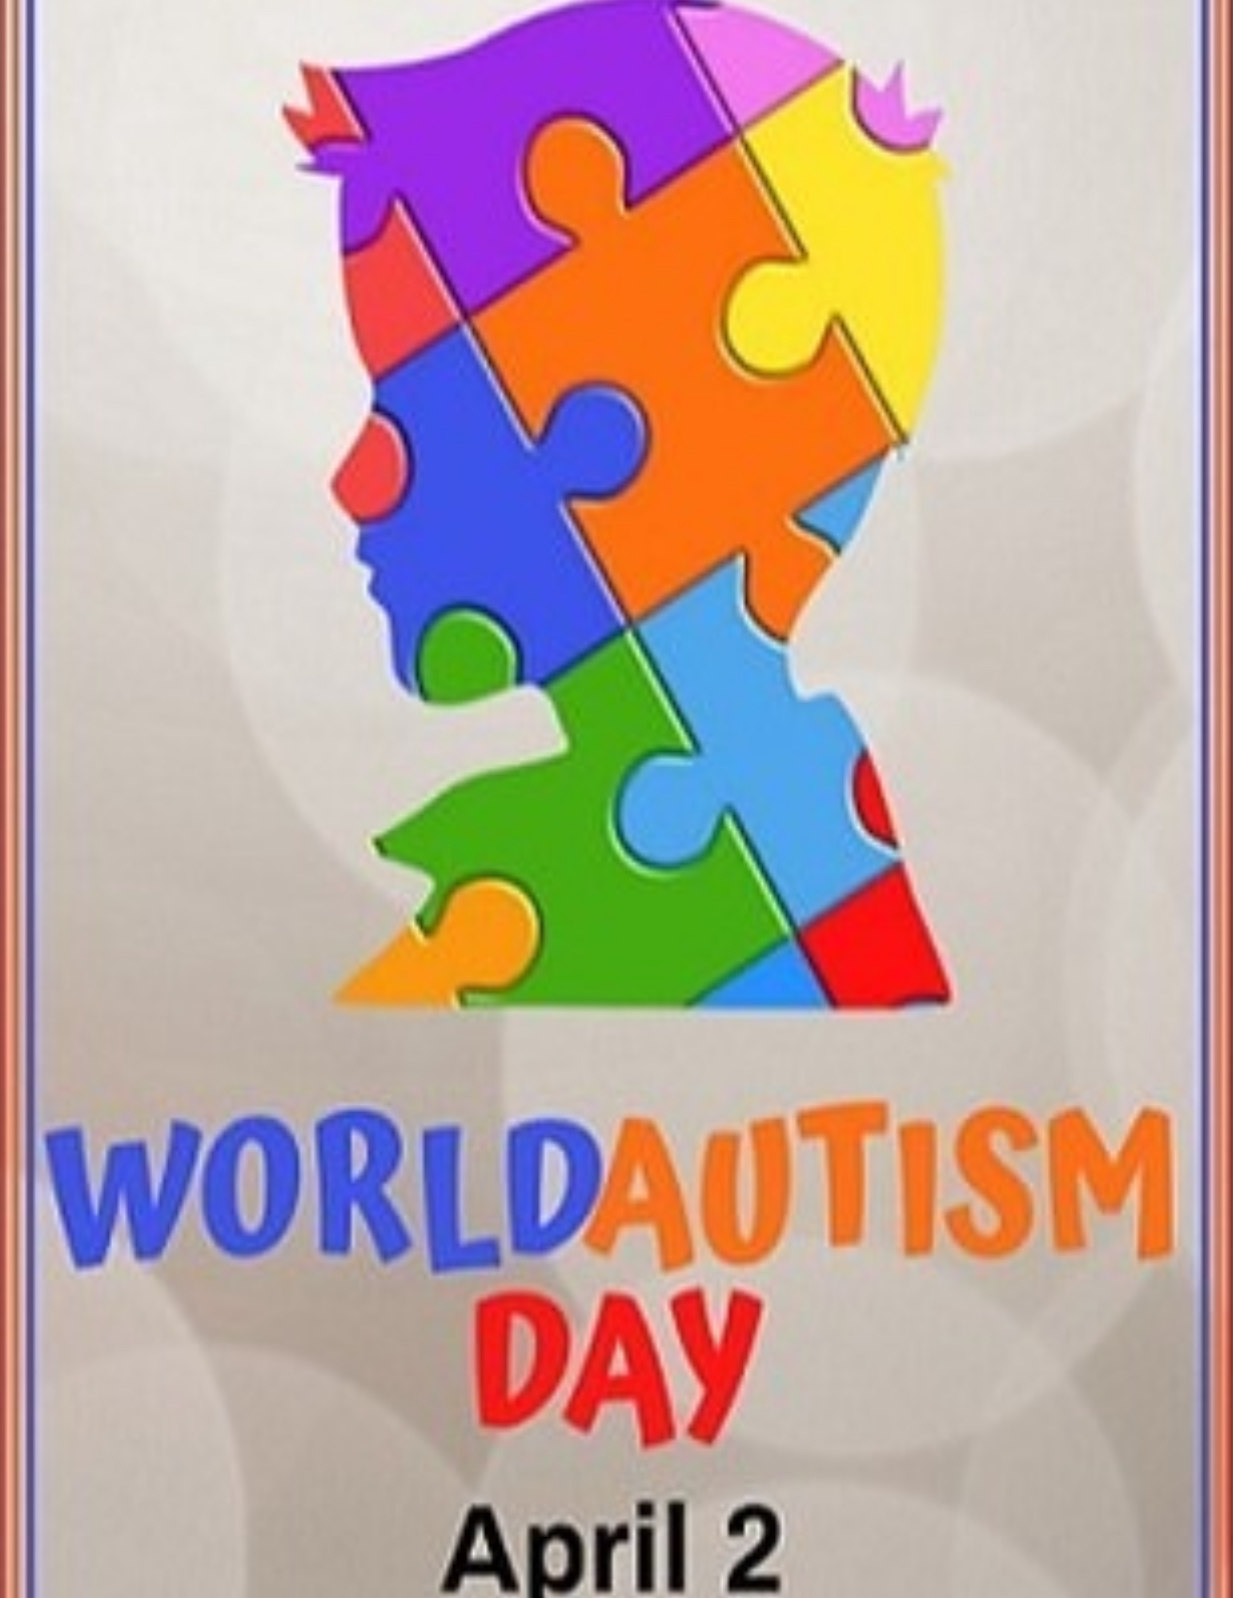 About World Autism Awareness Day